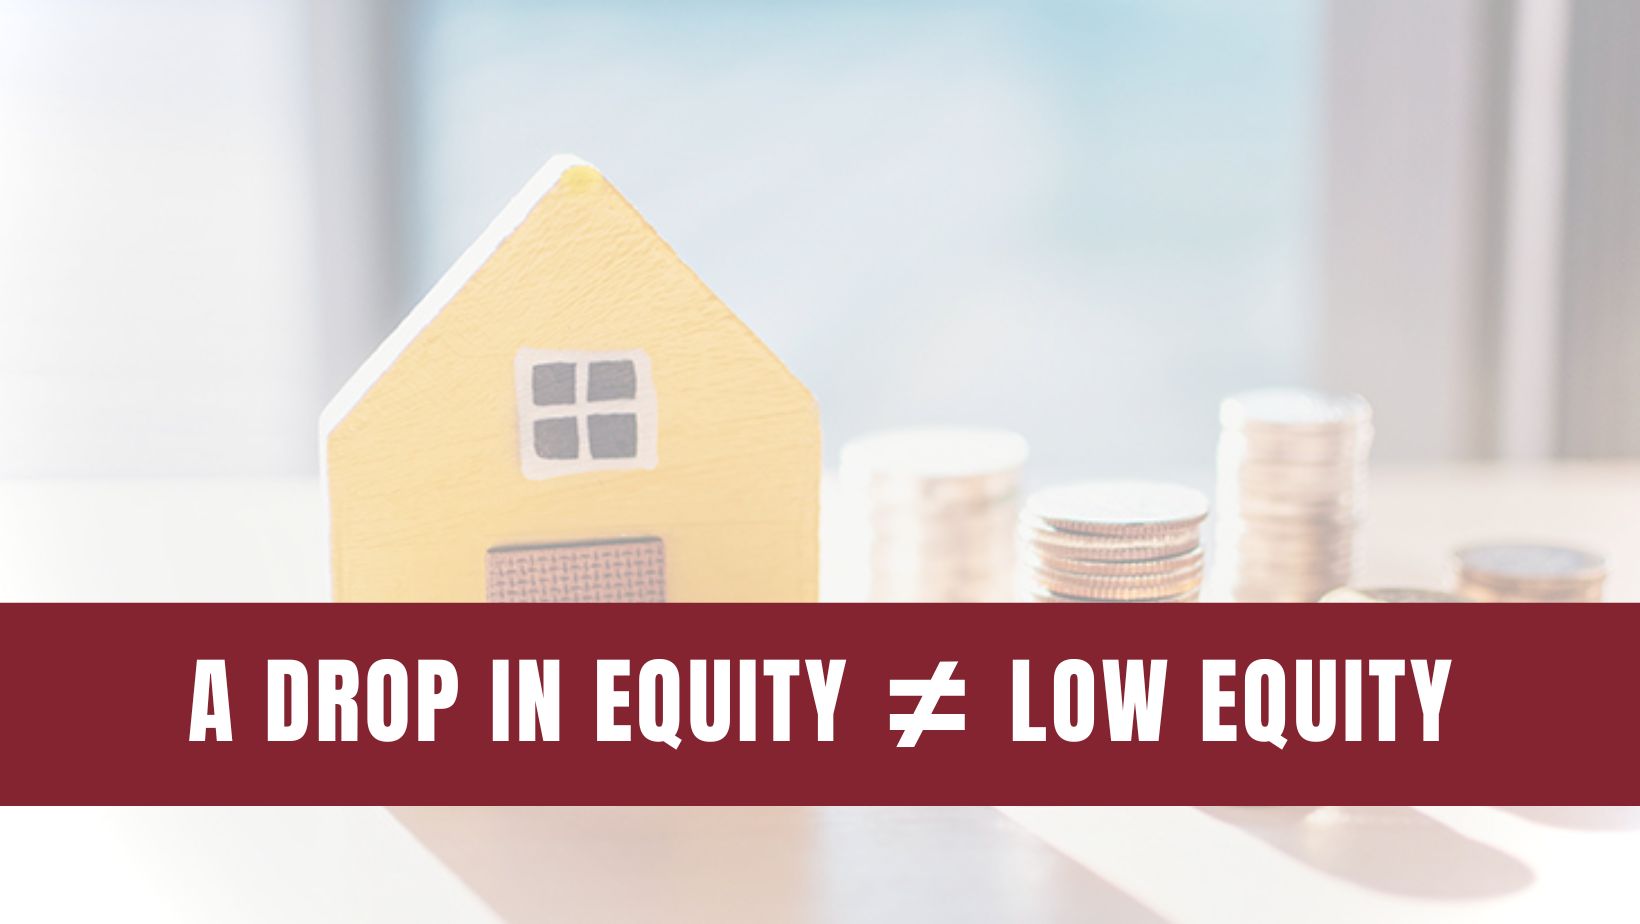 A Drop in Equity Doesn’t Mean Low Equity